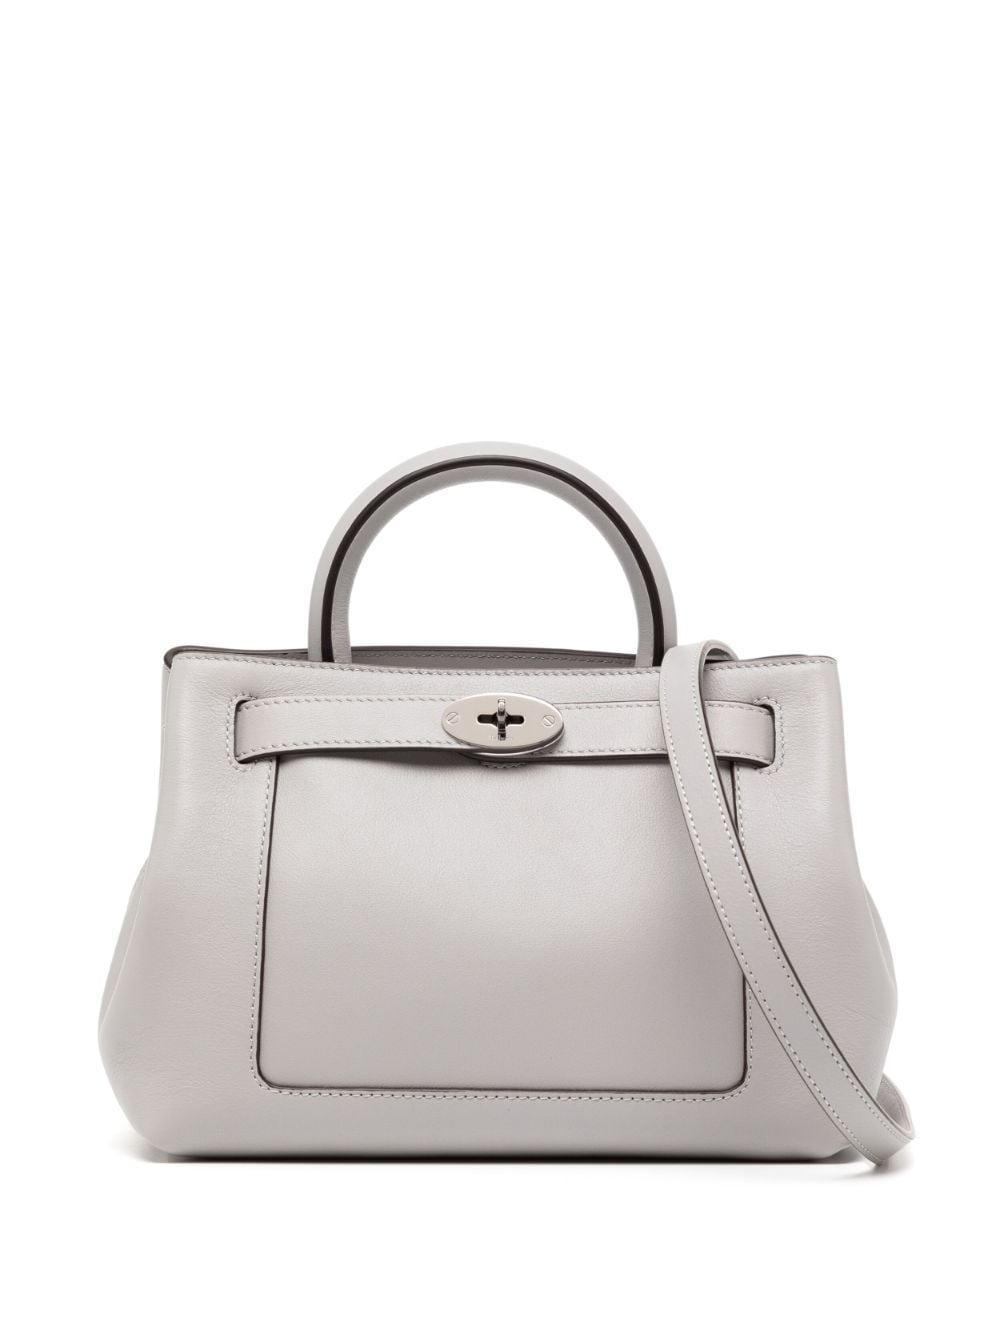 Mulberry Small Islington leather shoulder bag - Grey von Mulberry